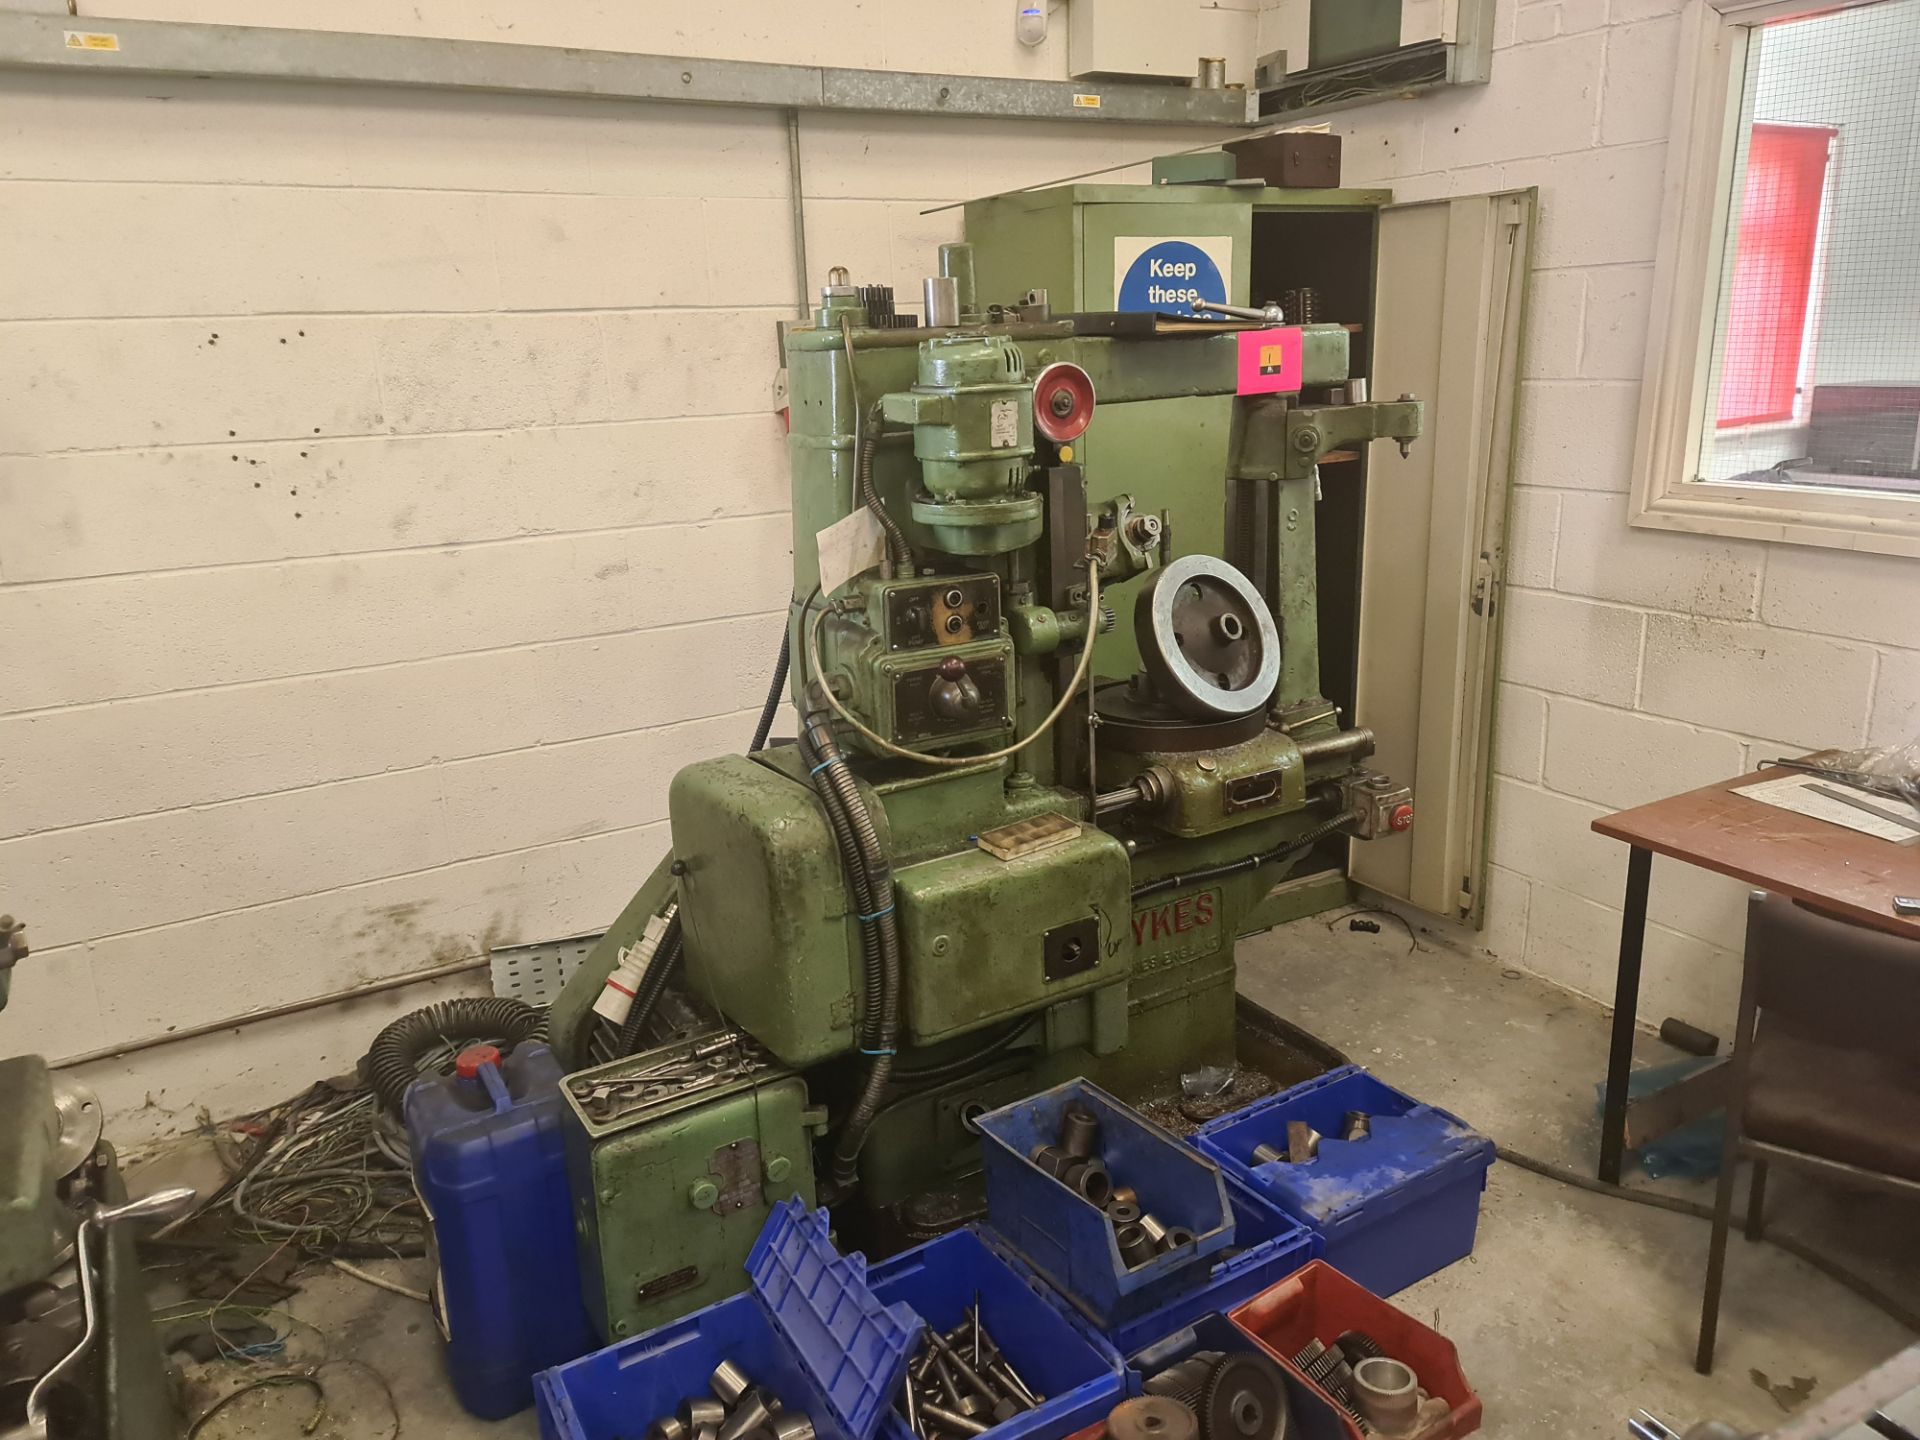 Sykes HV14 gear hobbing machine. This lot includes the crates & contents immediately surrounding th